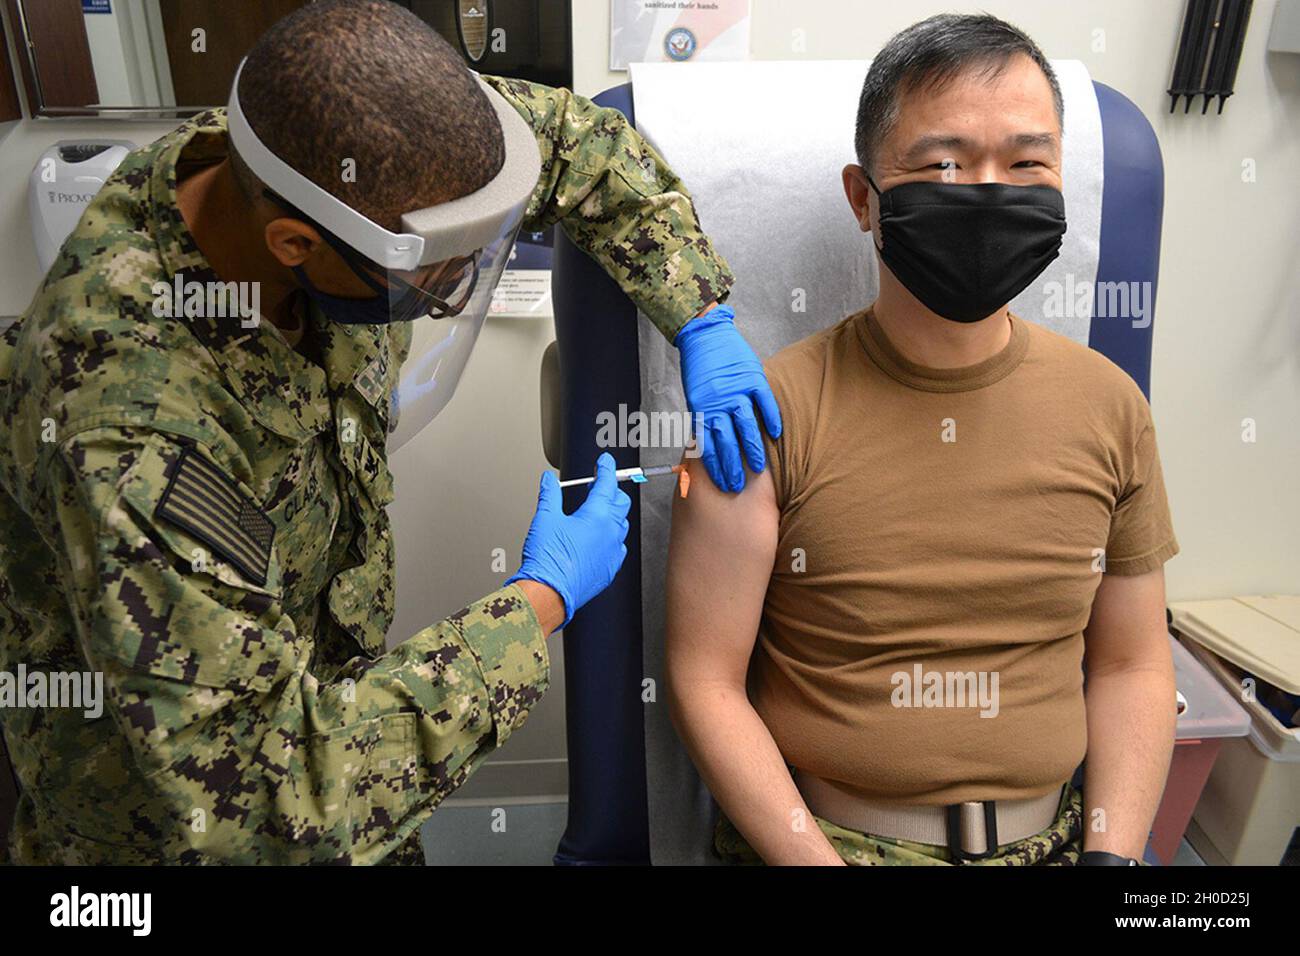 210128-N-CC785-0002 GREAT LAKES, Ill. (Jan. 28, 2021) - Capt. Ray Leung, Naval Station Great Lakes commanding officer, received the coronavirus vaccine at Fisher Clinic. Stock Photo